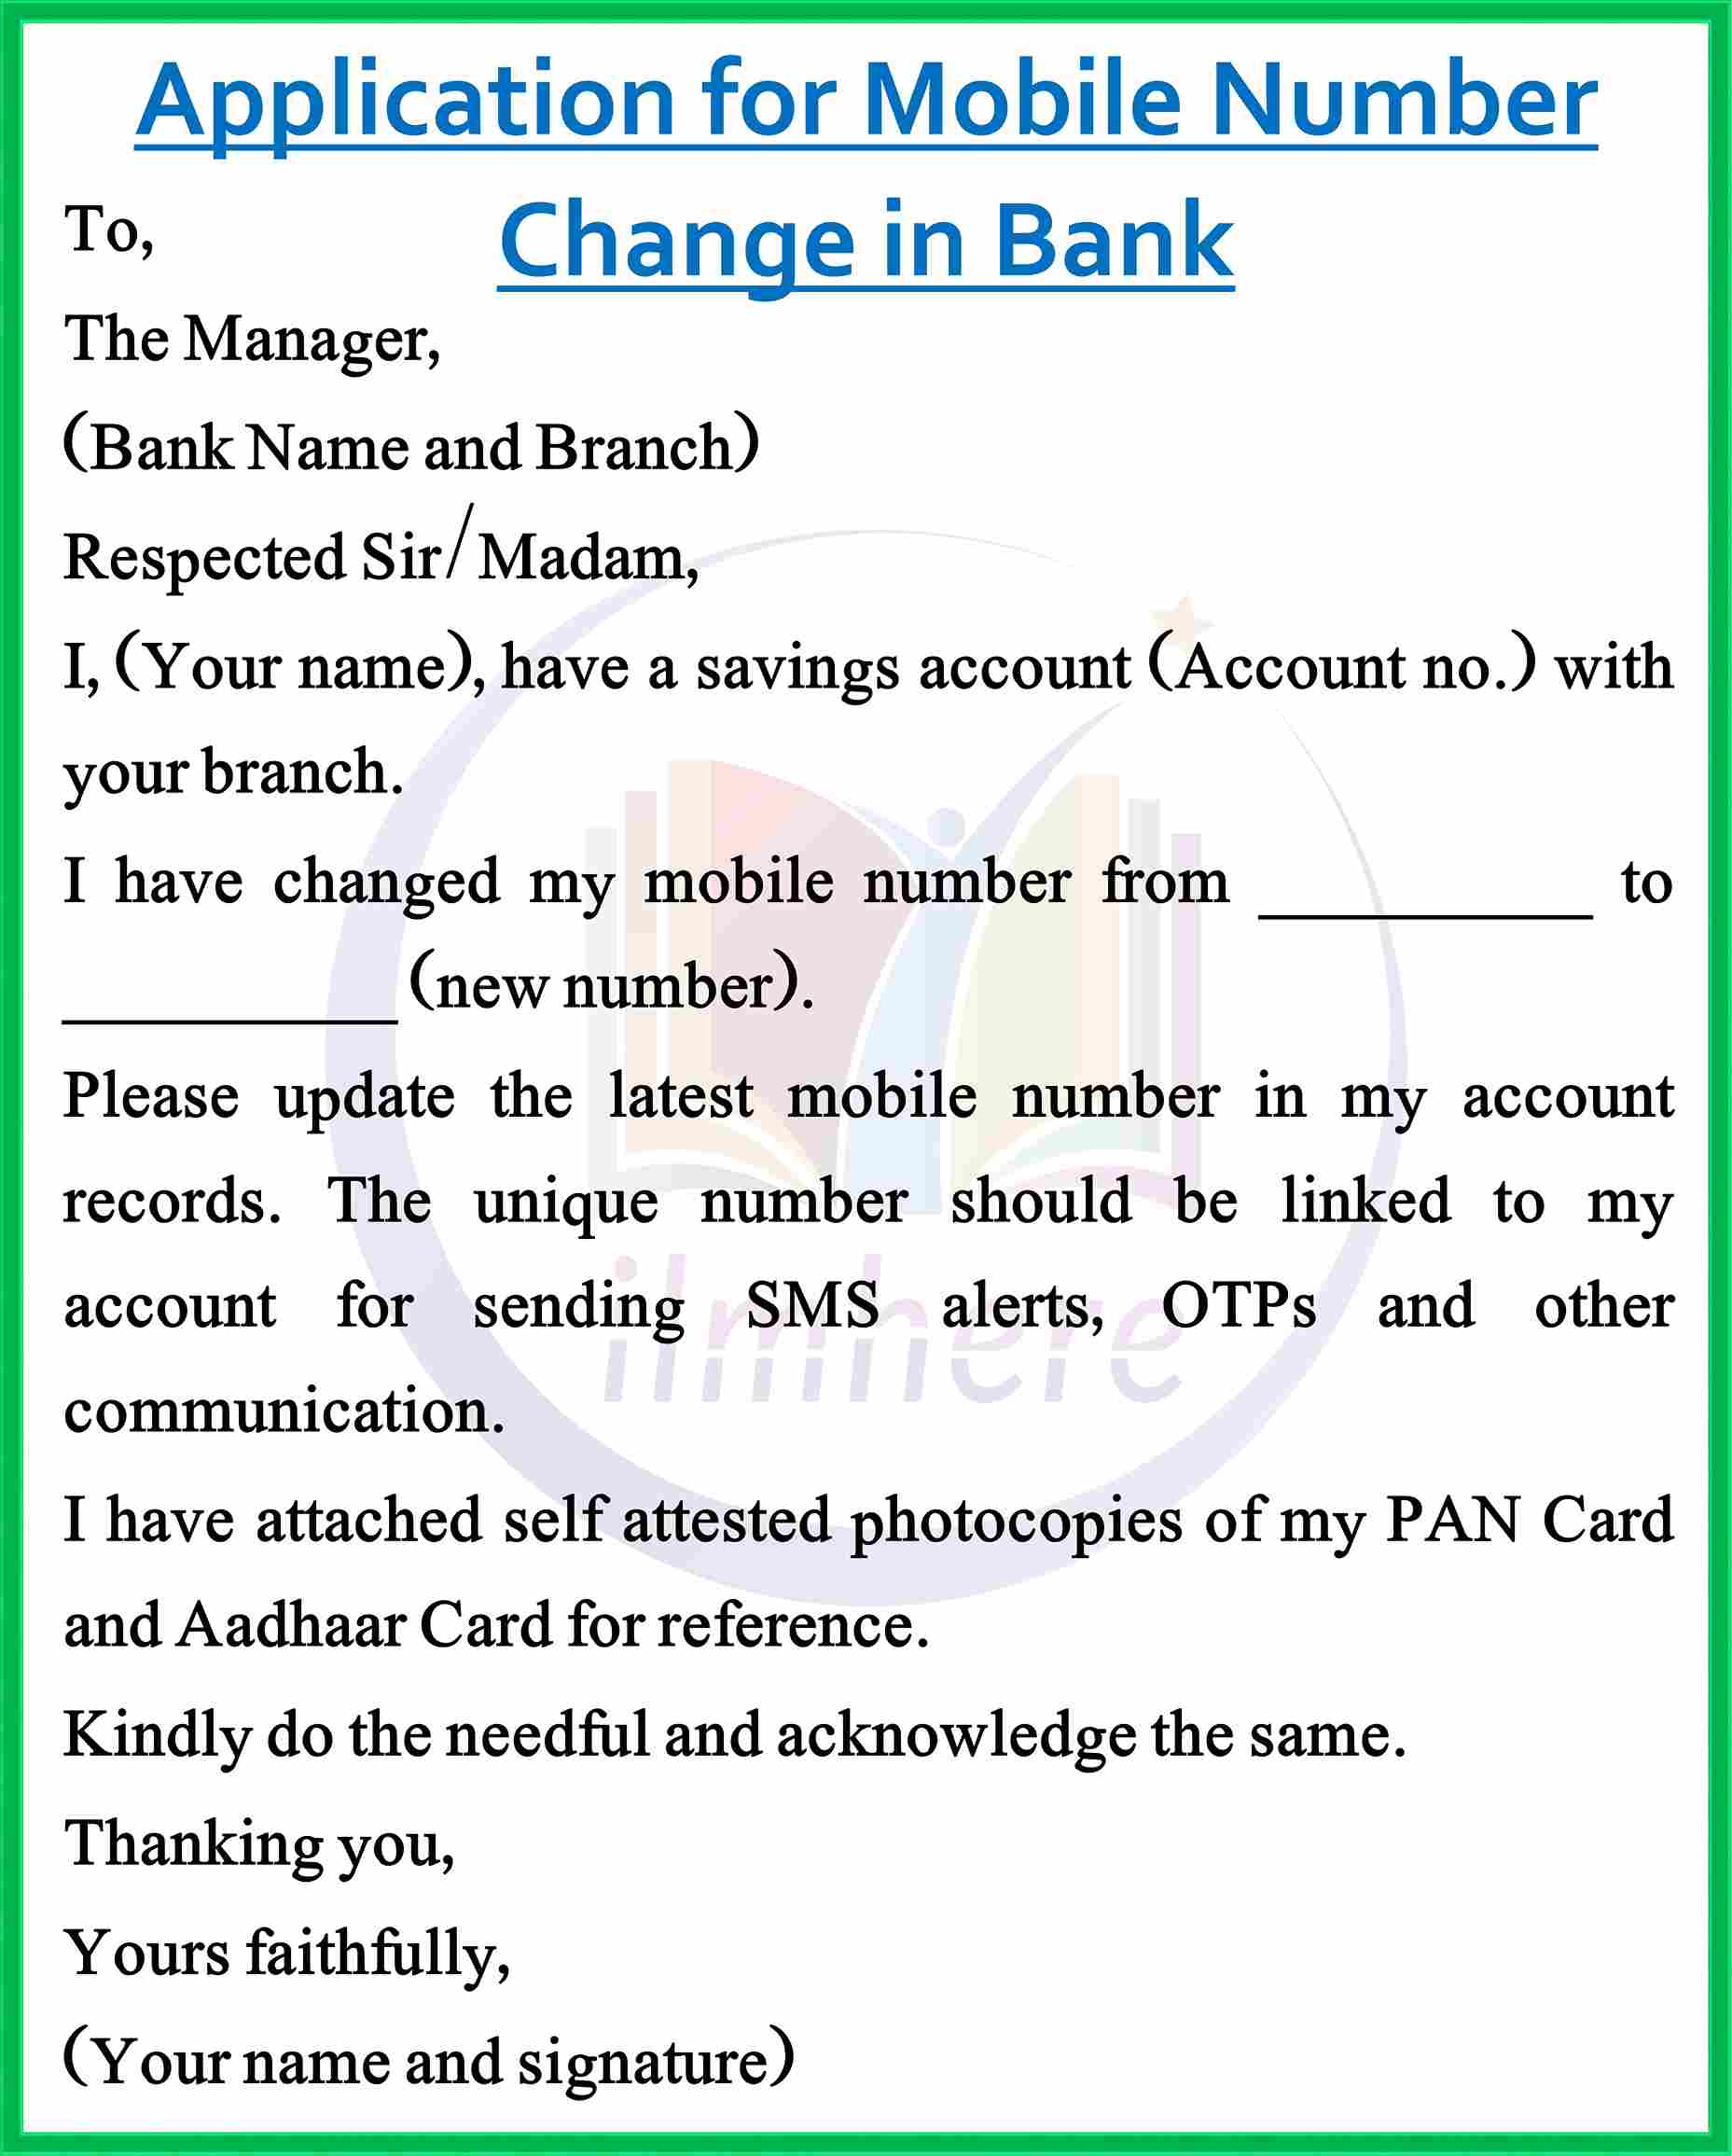 Applications for Change Mobile Numbers in Bank - 1